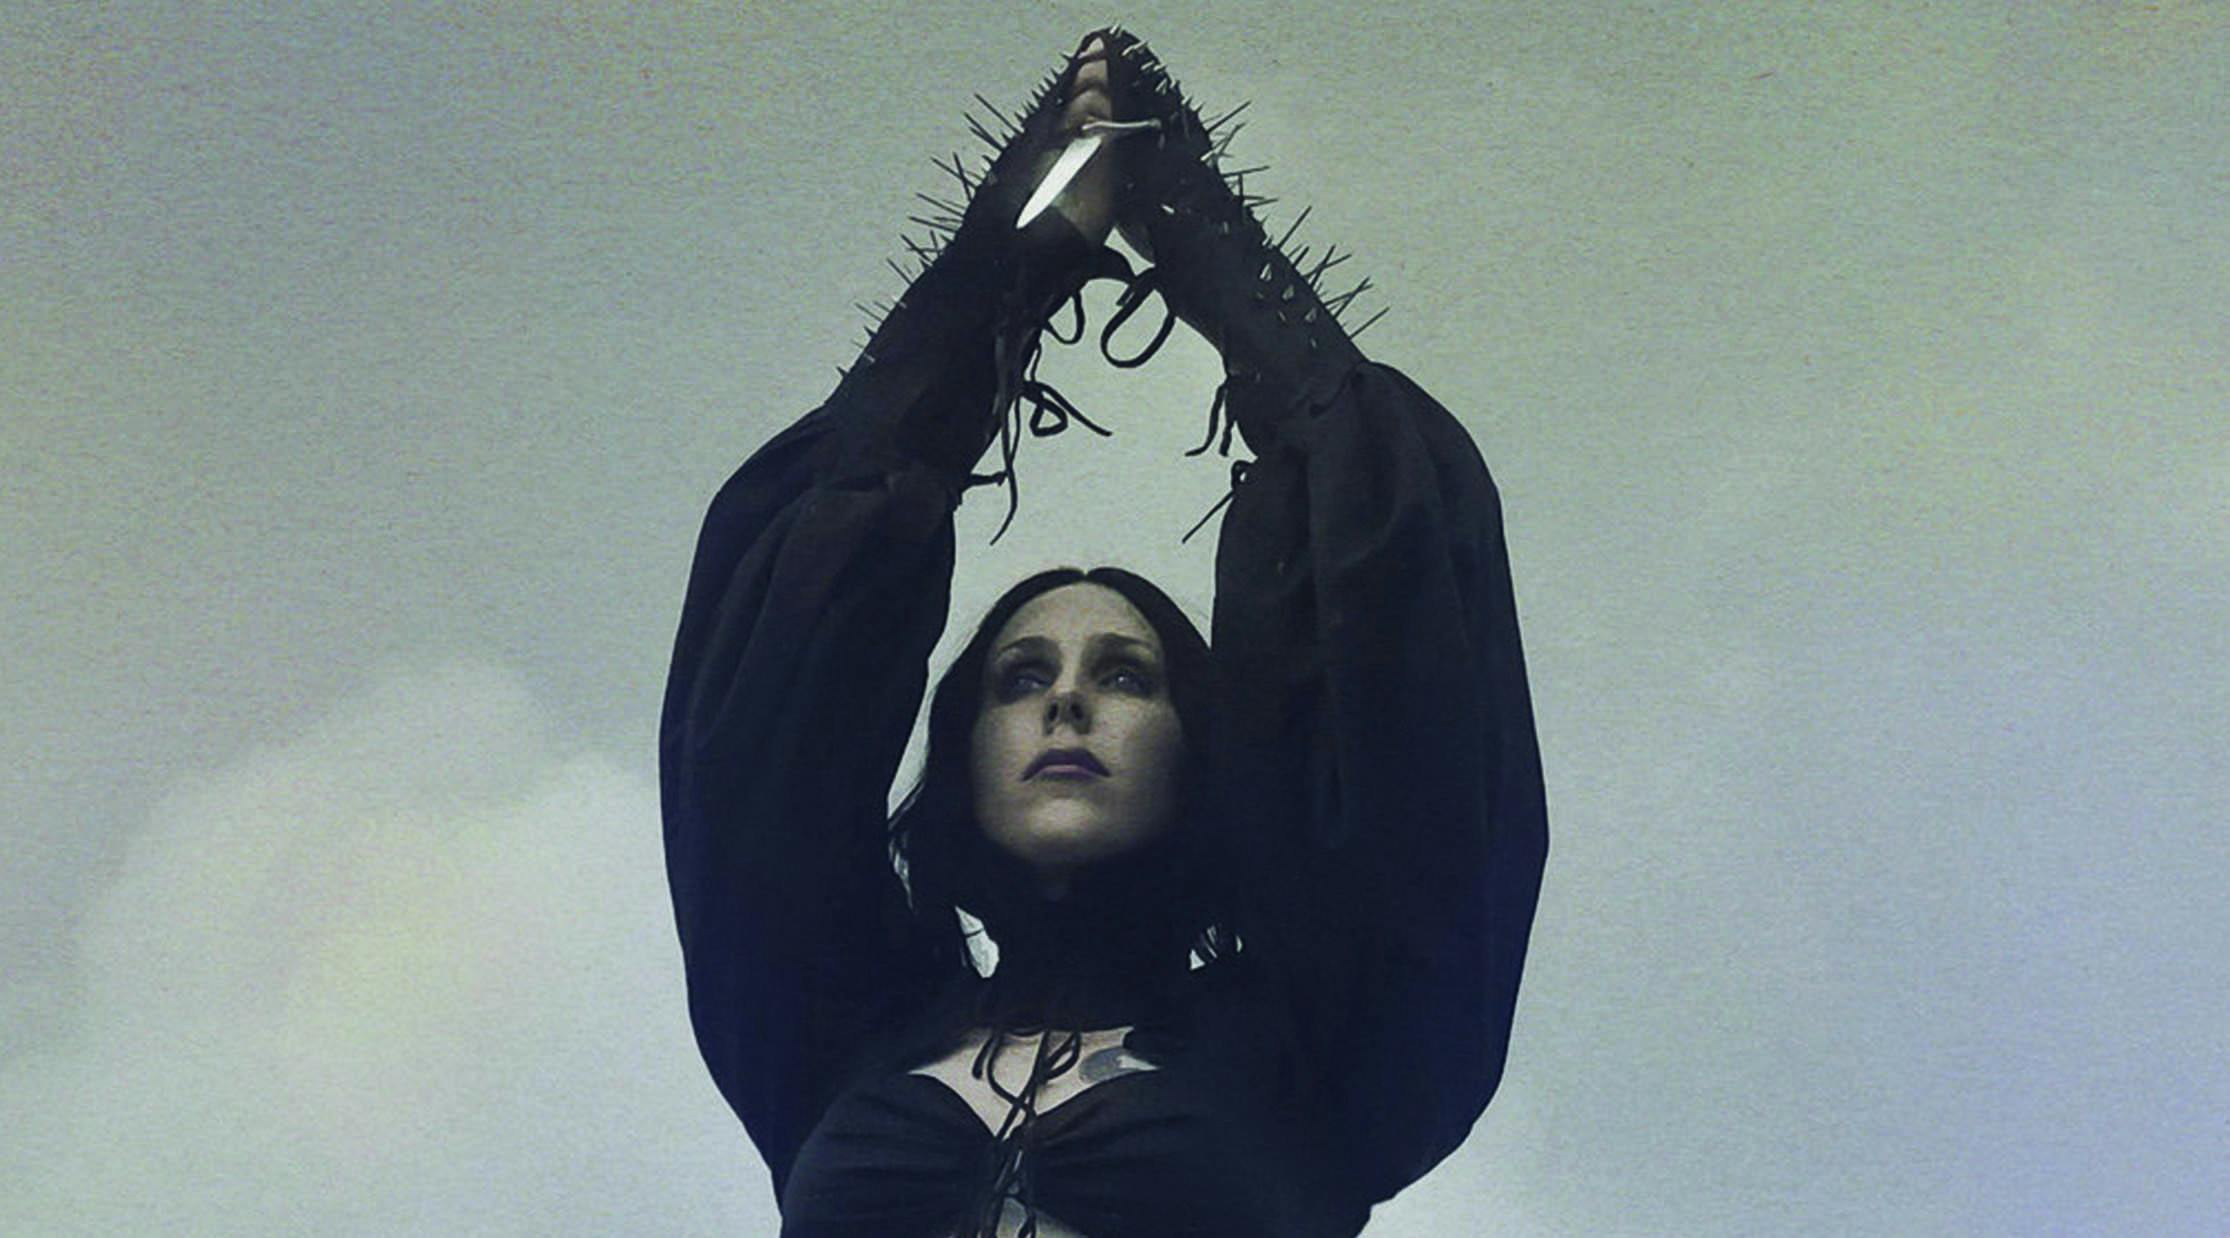 Album Review: Chelsea Wolfe – Birth Of Violence